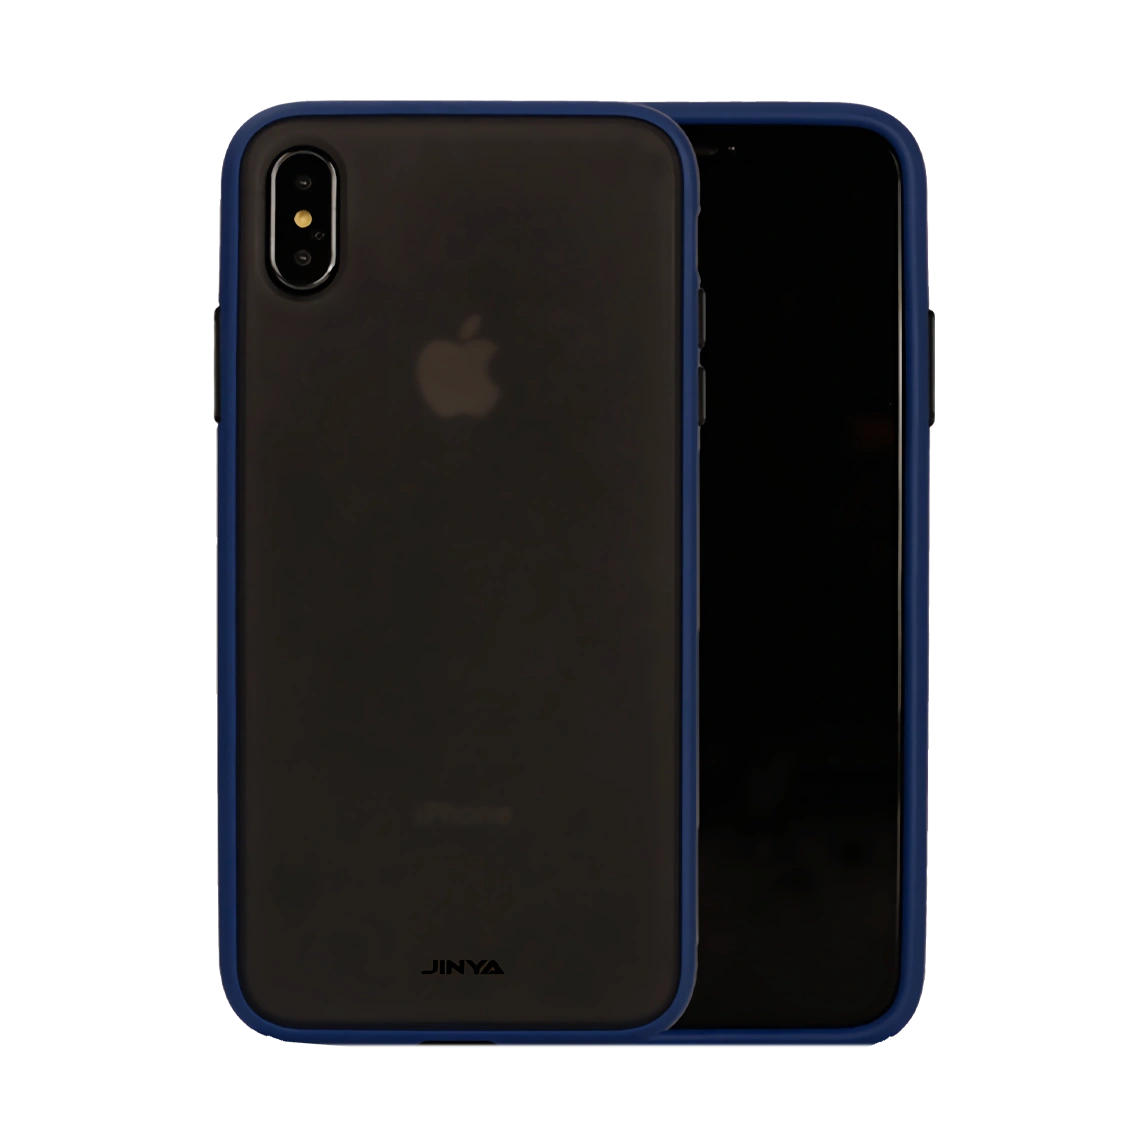 Jinya Sandy Pro Case for IPhone X and XS